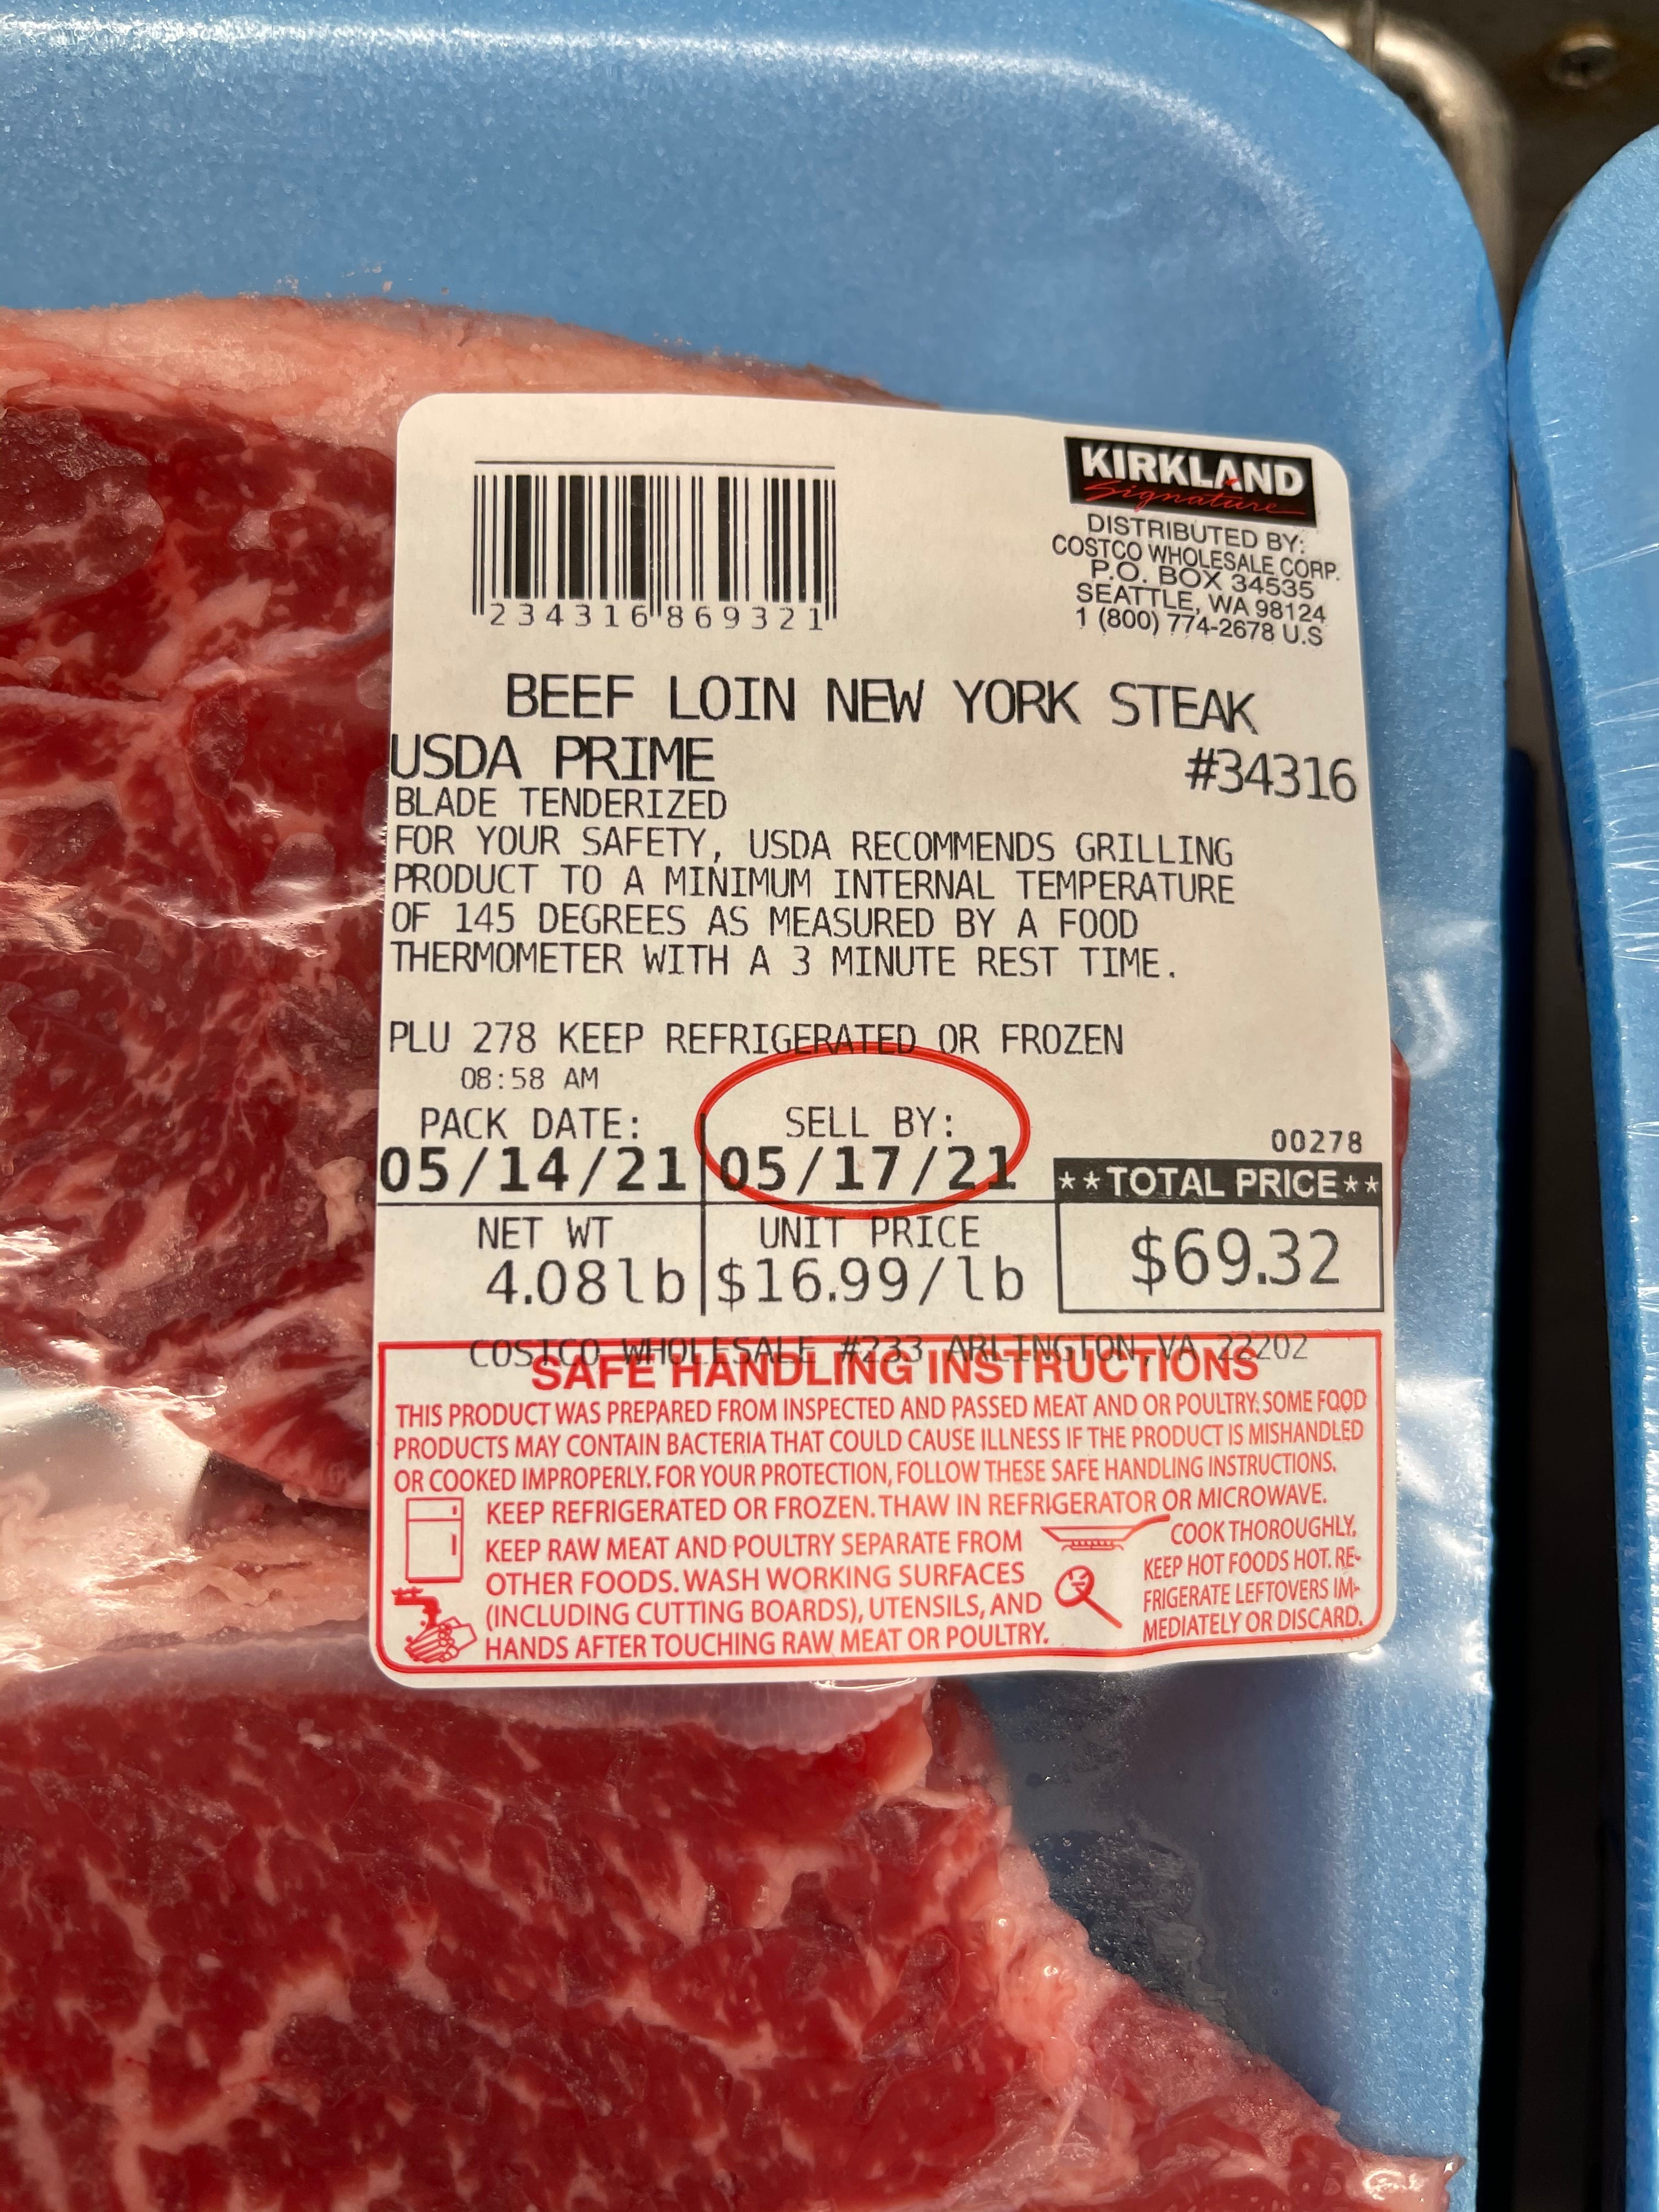 Discounted beef products